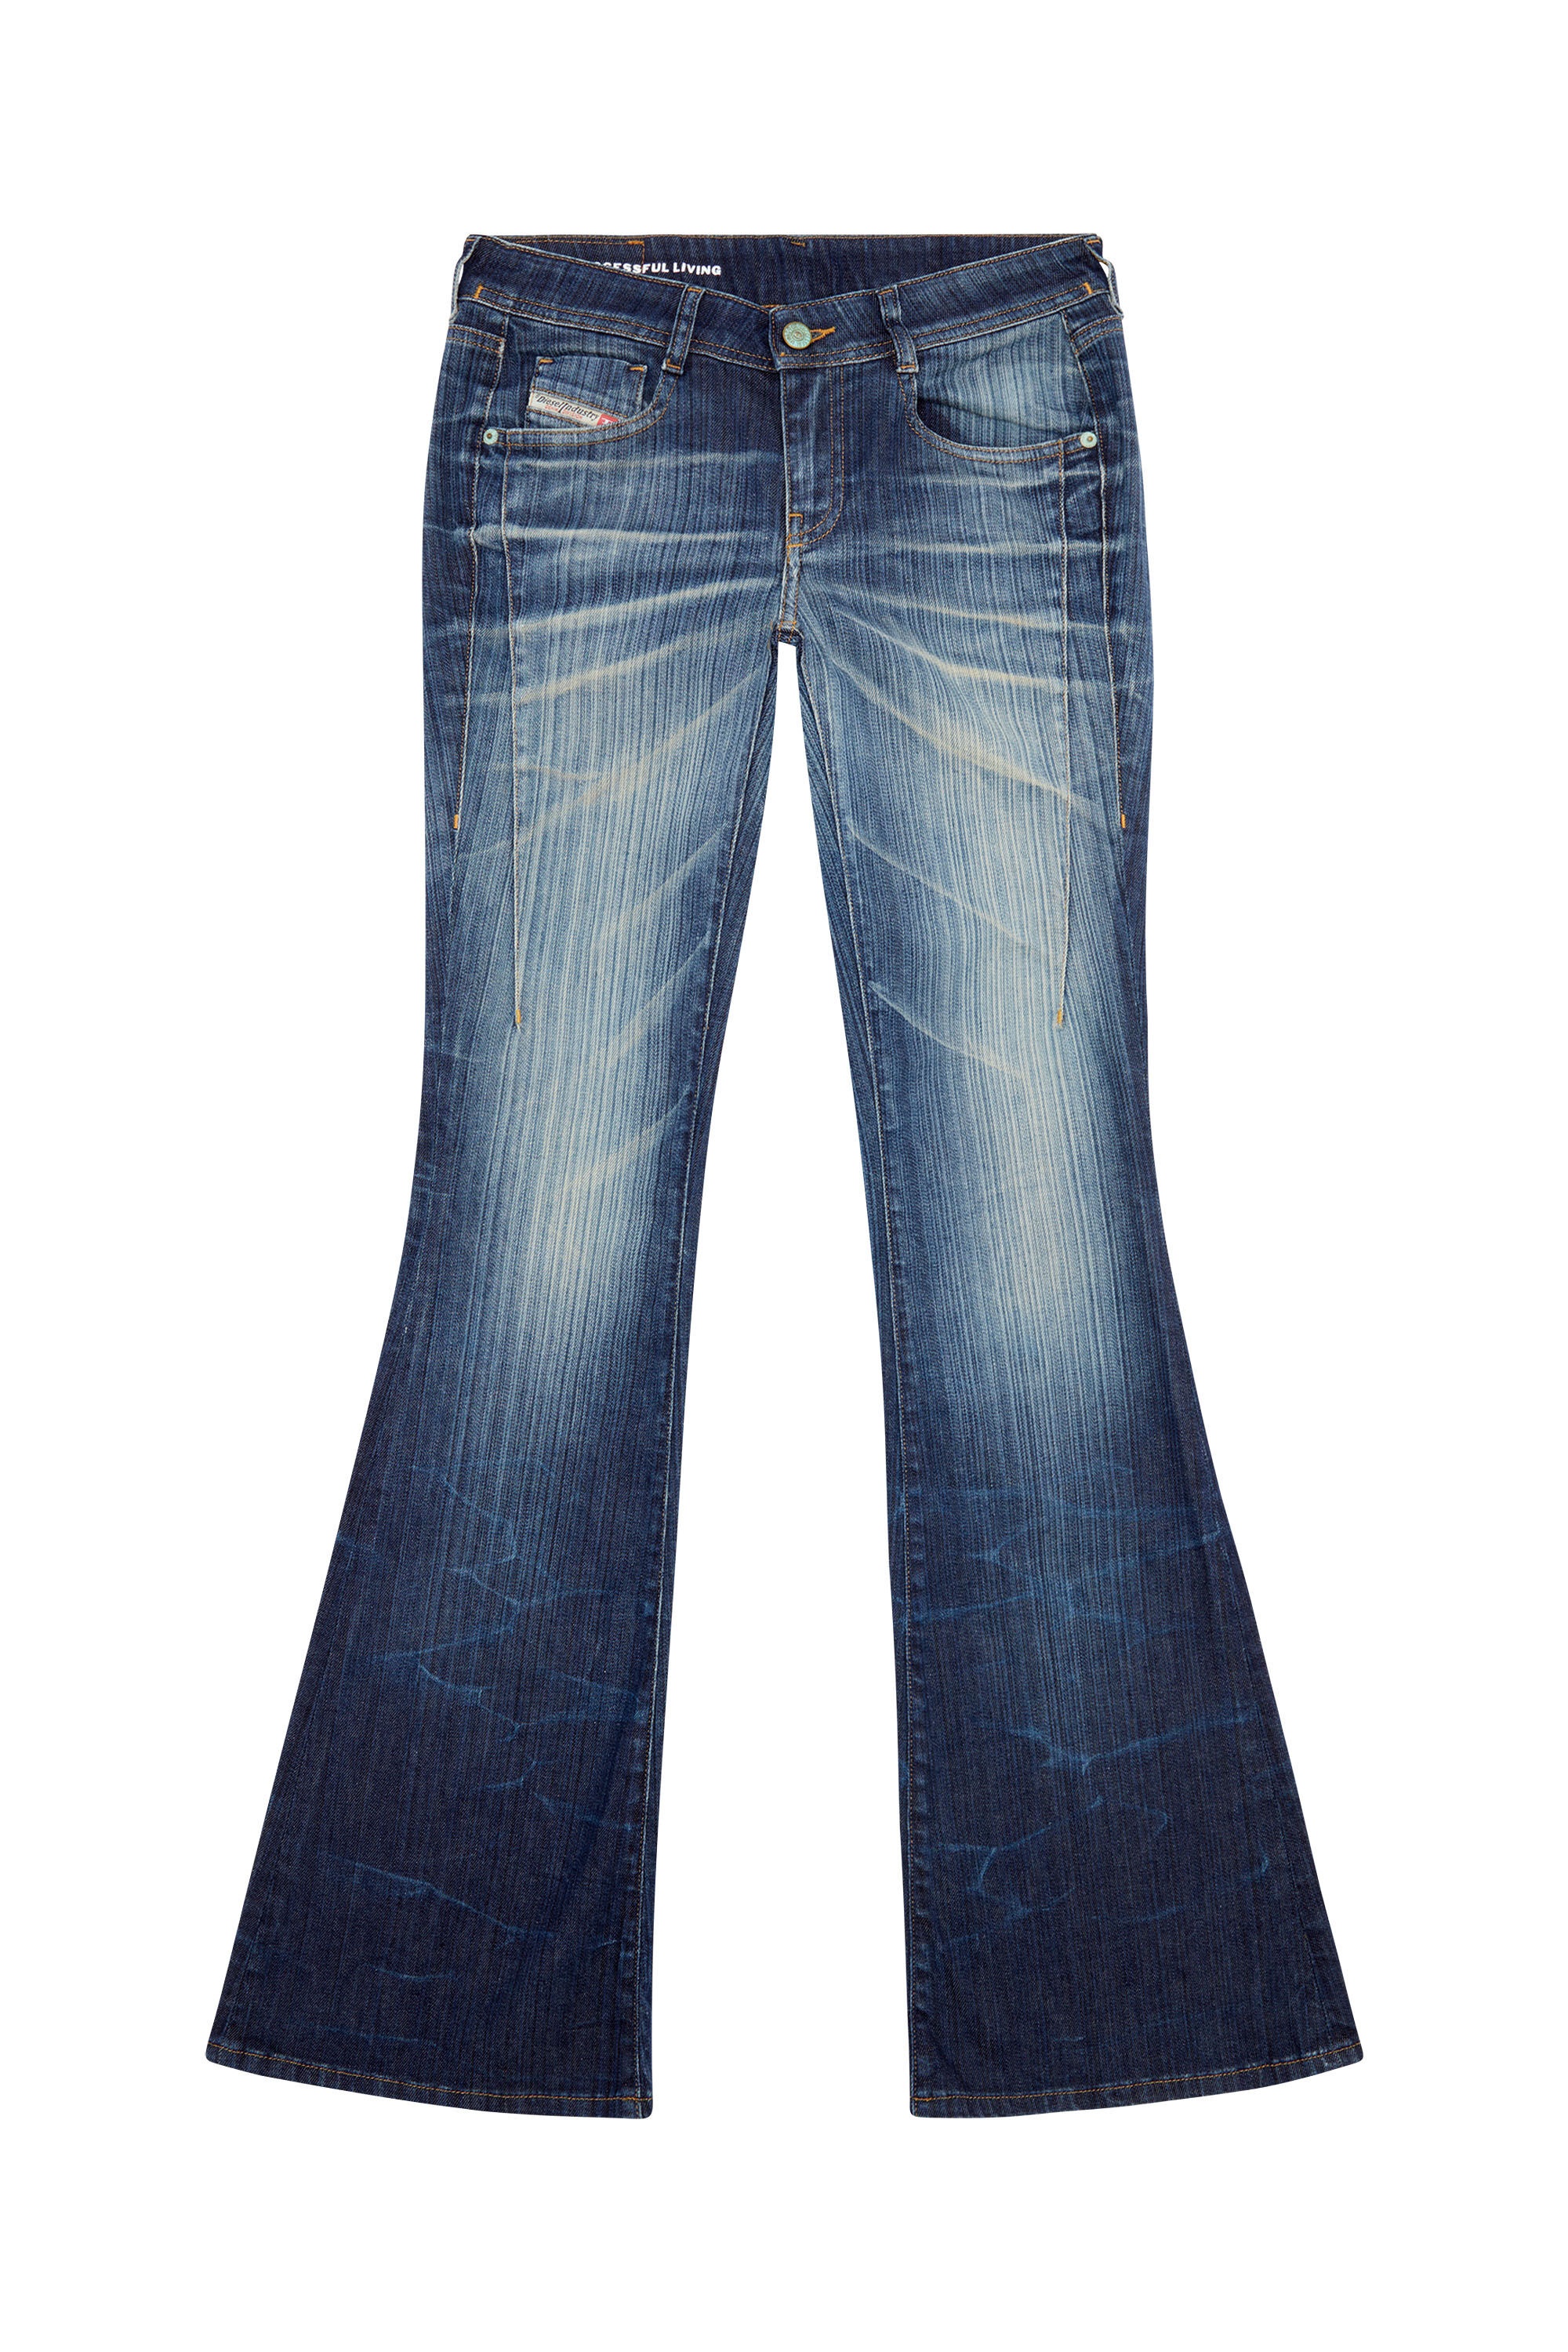 BOOTCUT AND FLARE JEANS 1969 D-EBBEY 09I03 - 1